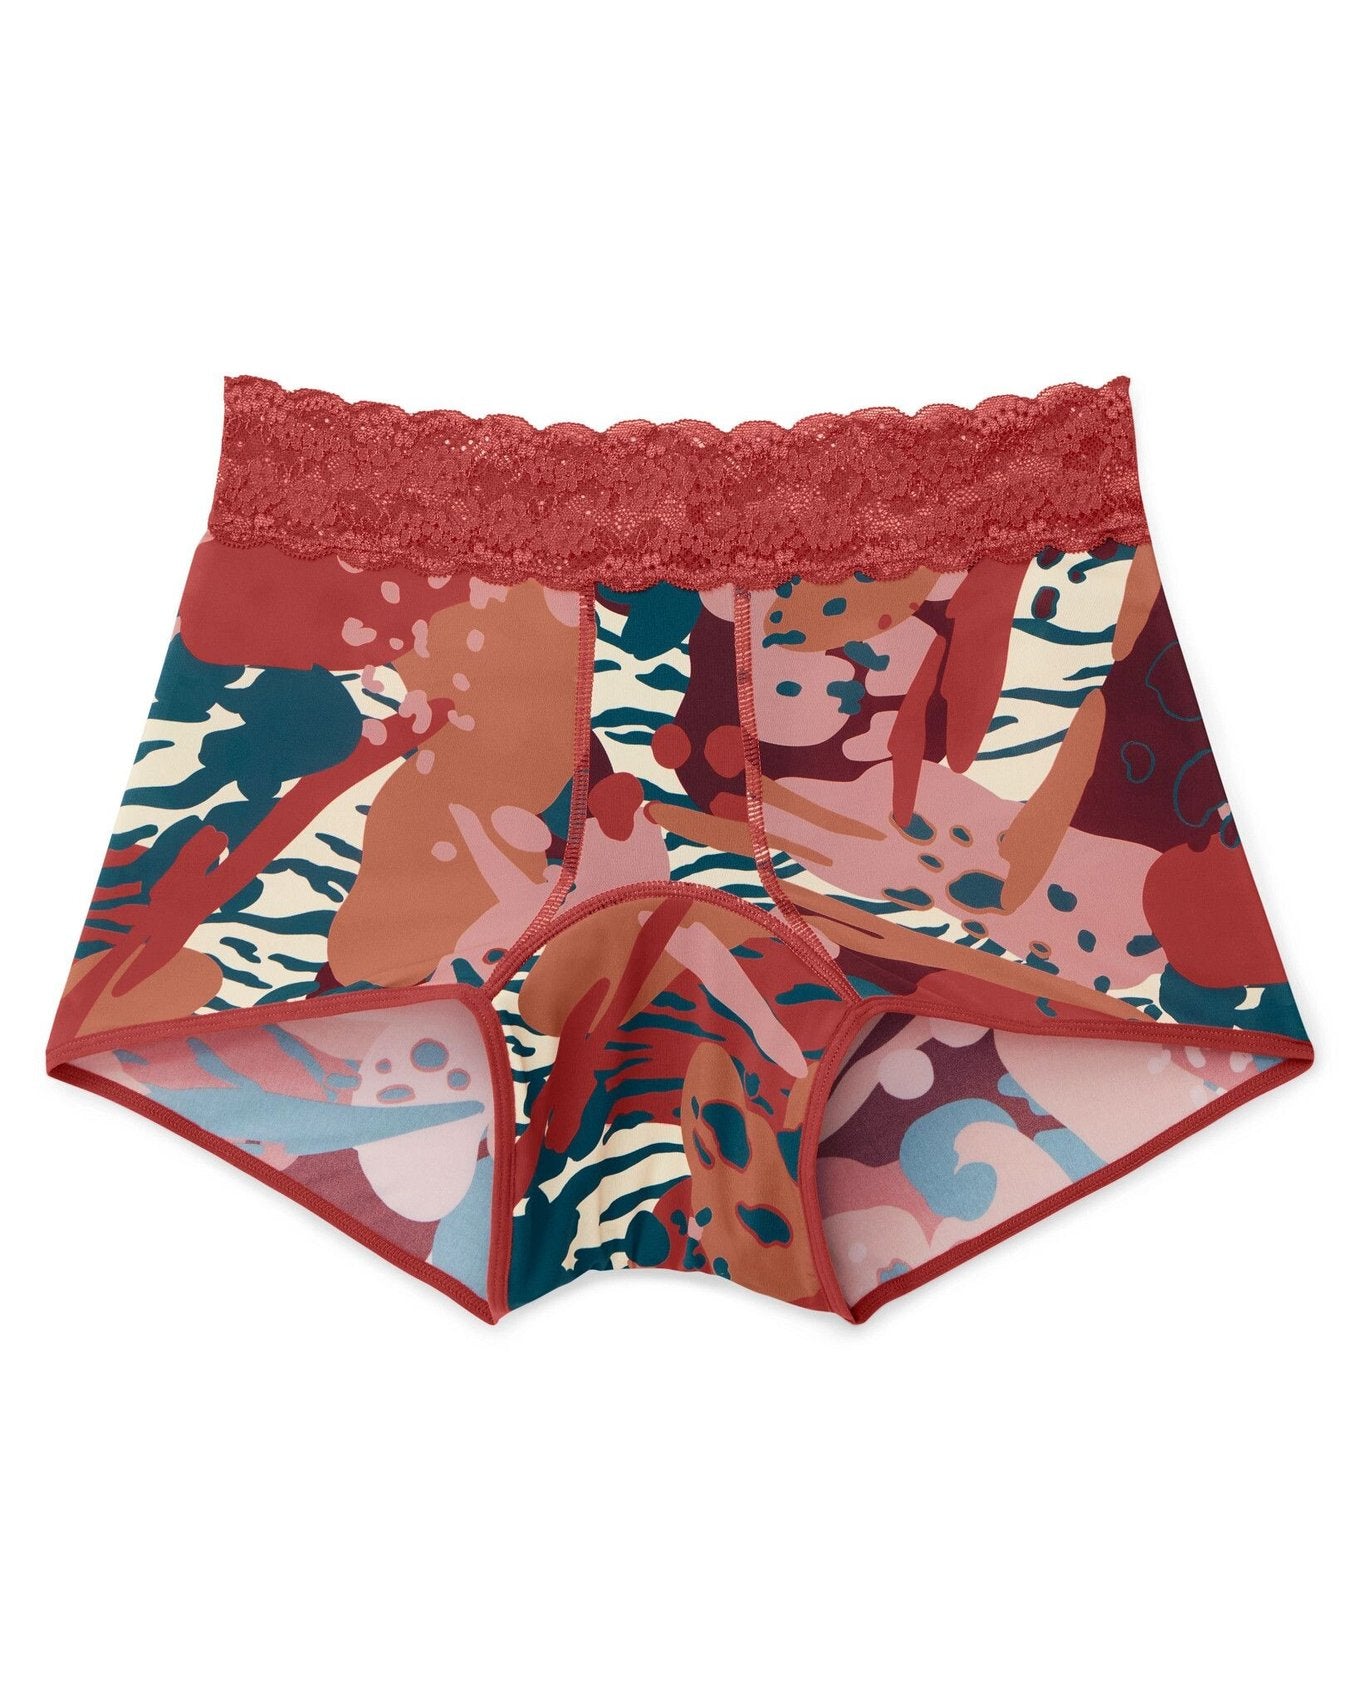 Joyja Emily period-proof panty in color Wild Heart C01 and shape shortie